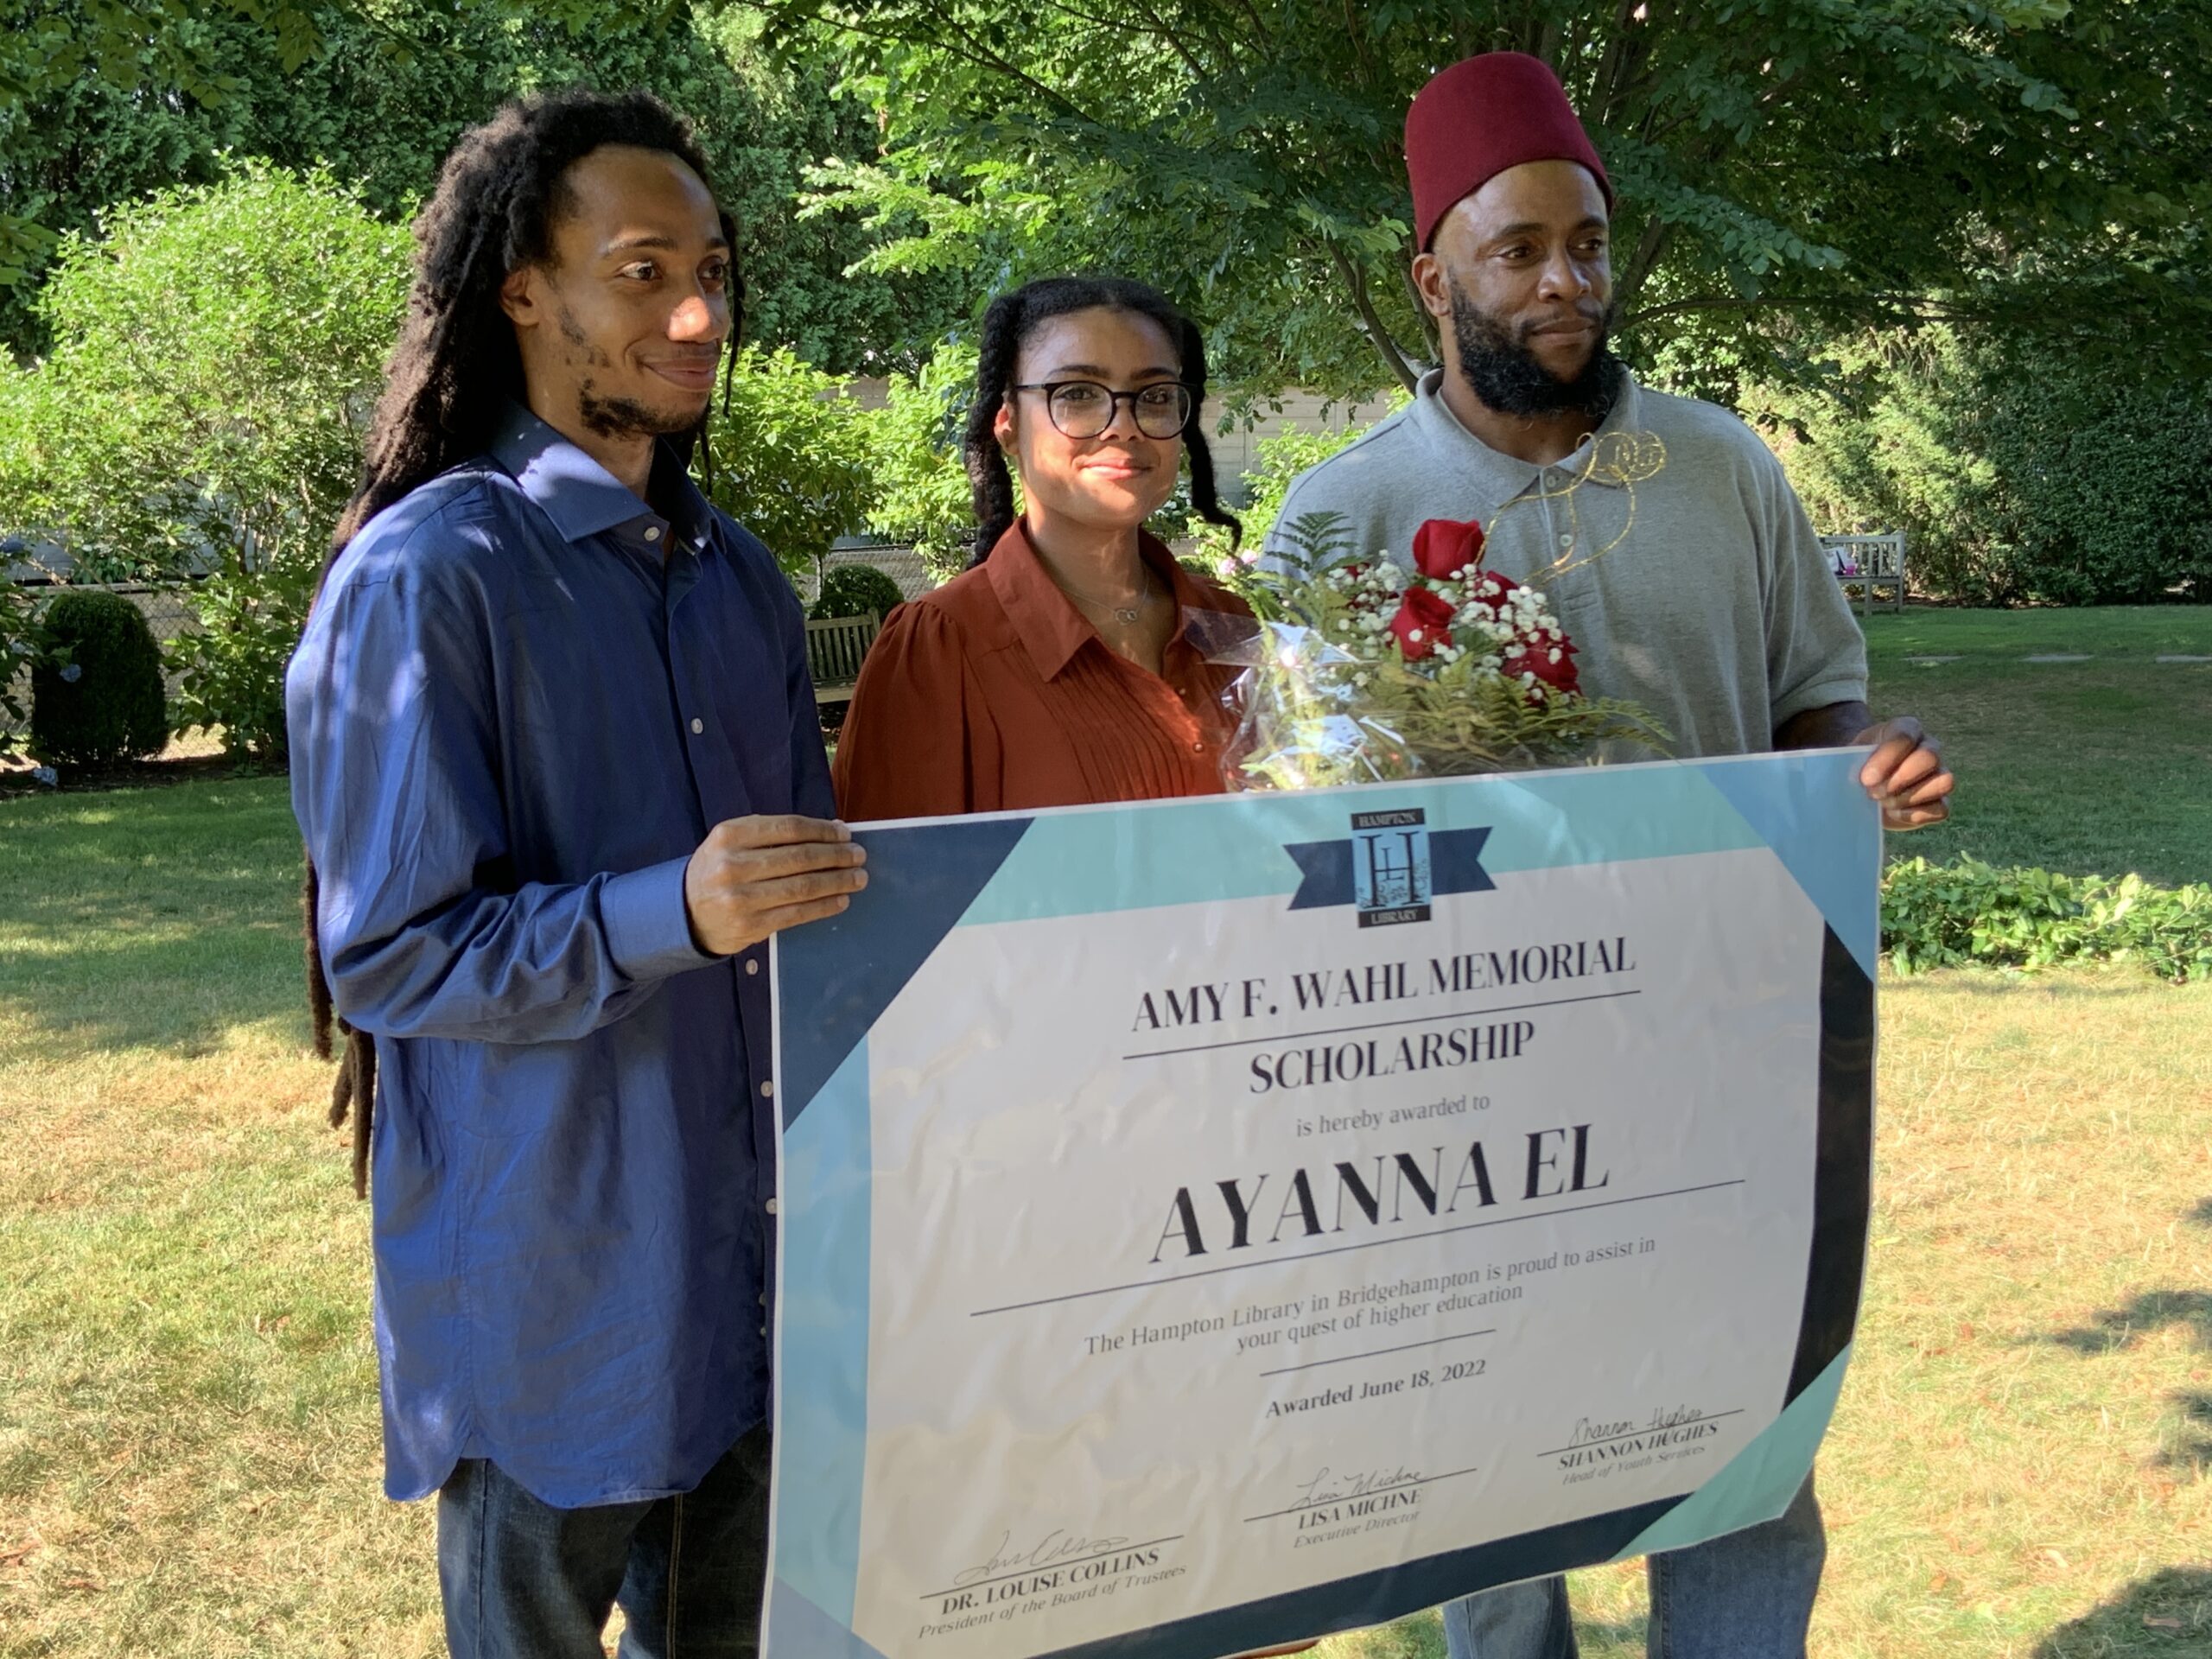 Ayanna El, the winner of the Amy F. Wahl Memorial Scholarship, is flanked by her brother Ameer El, left, and father, Muslim El, right, at a reception at the Hampton Library on July 20. STEPHEN J. KOTZ